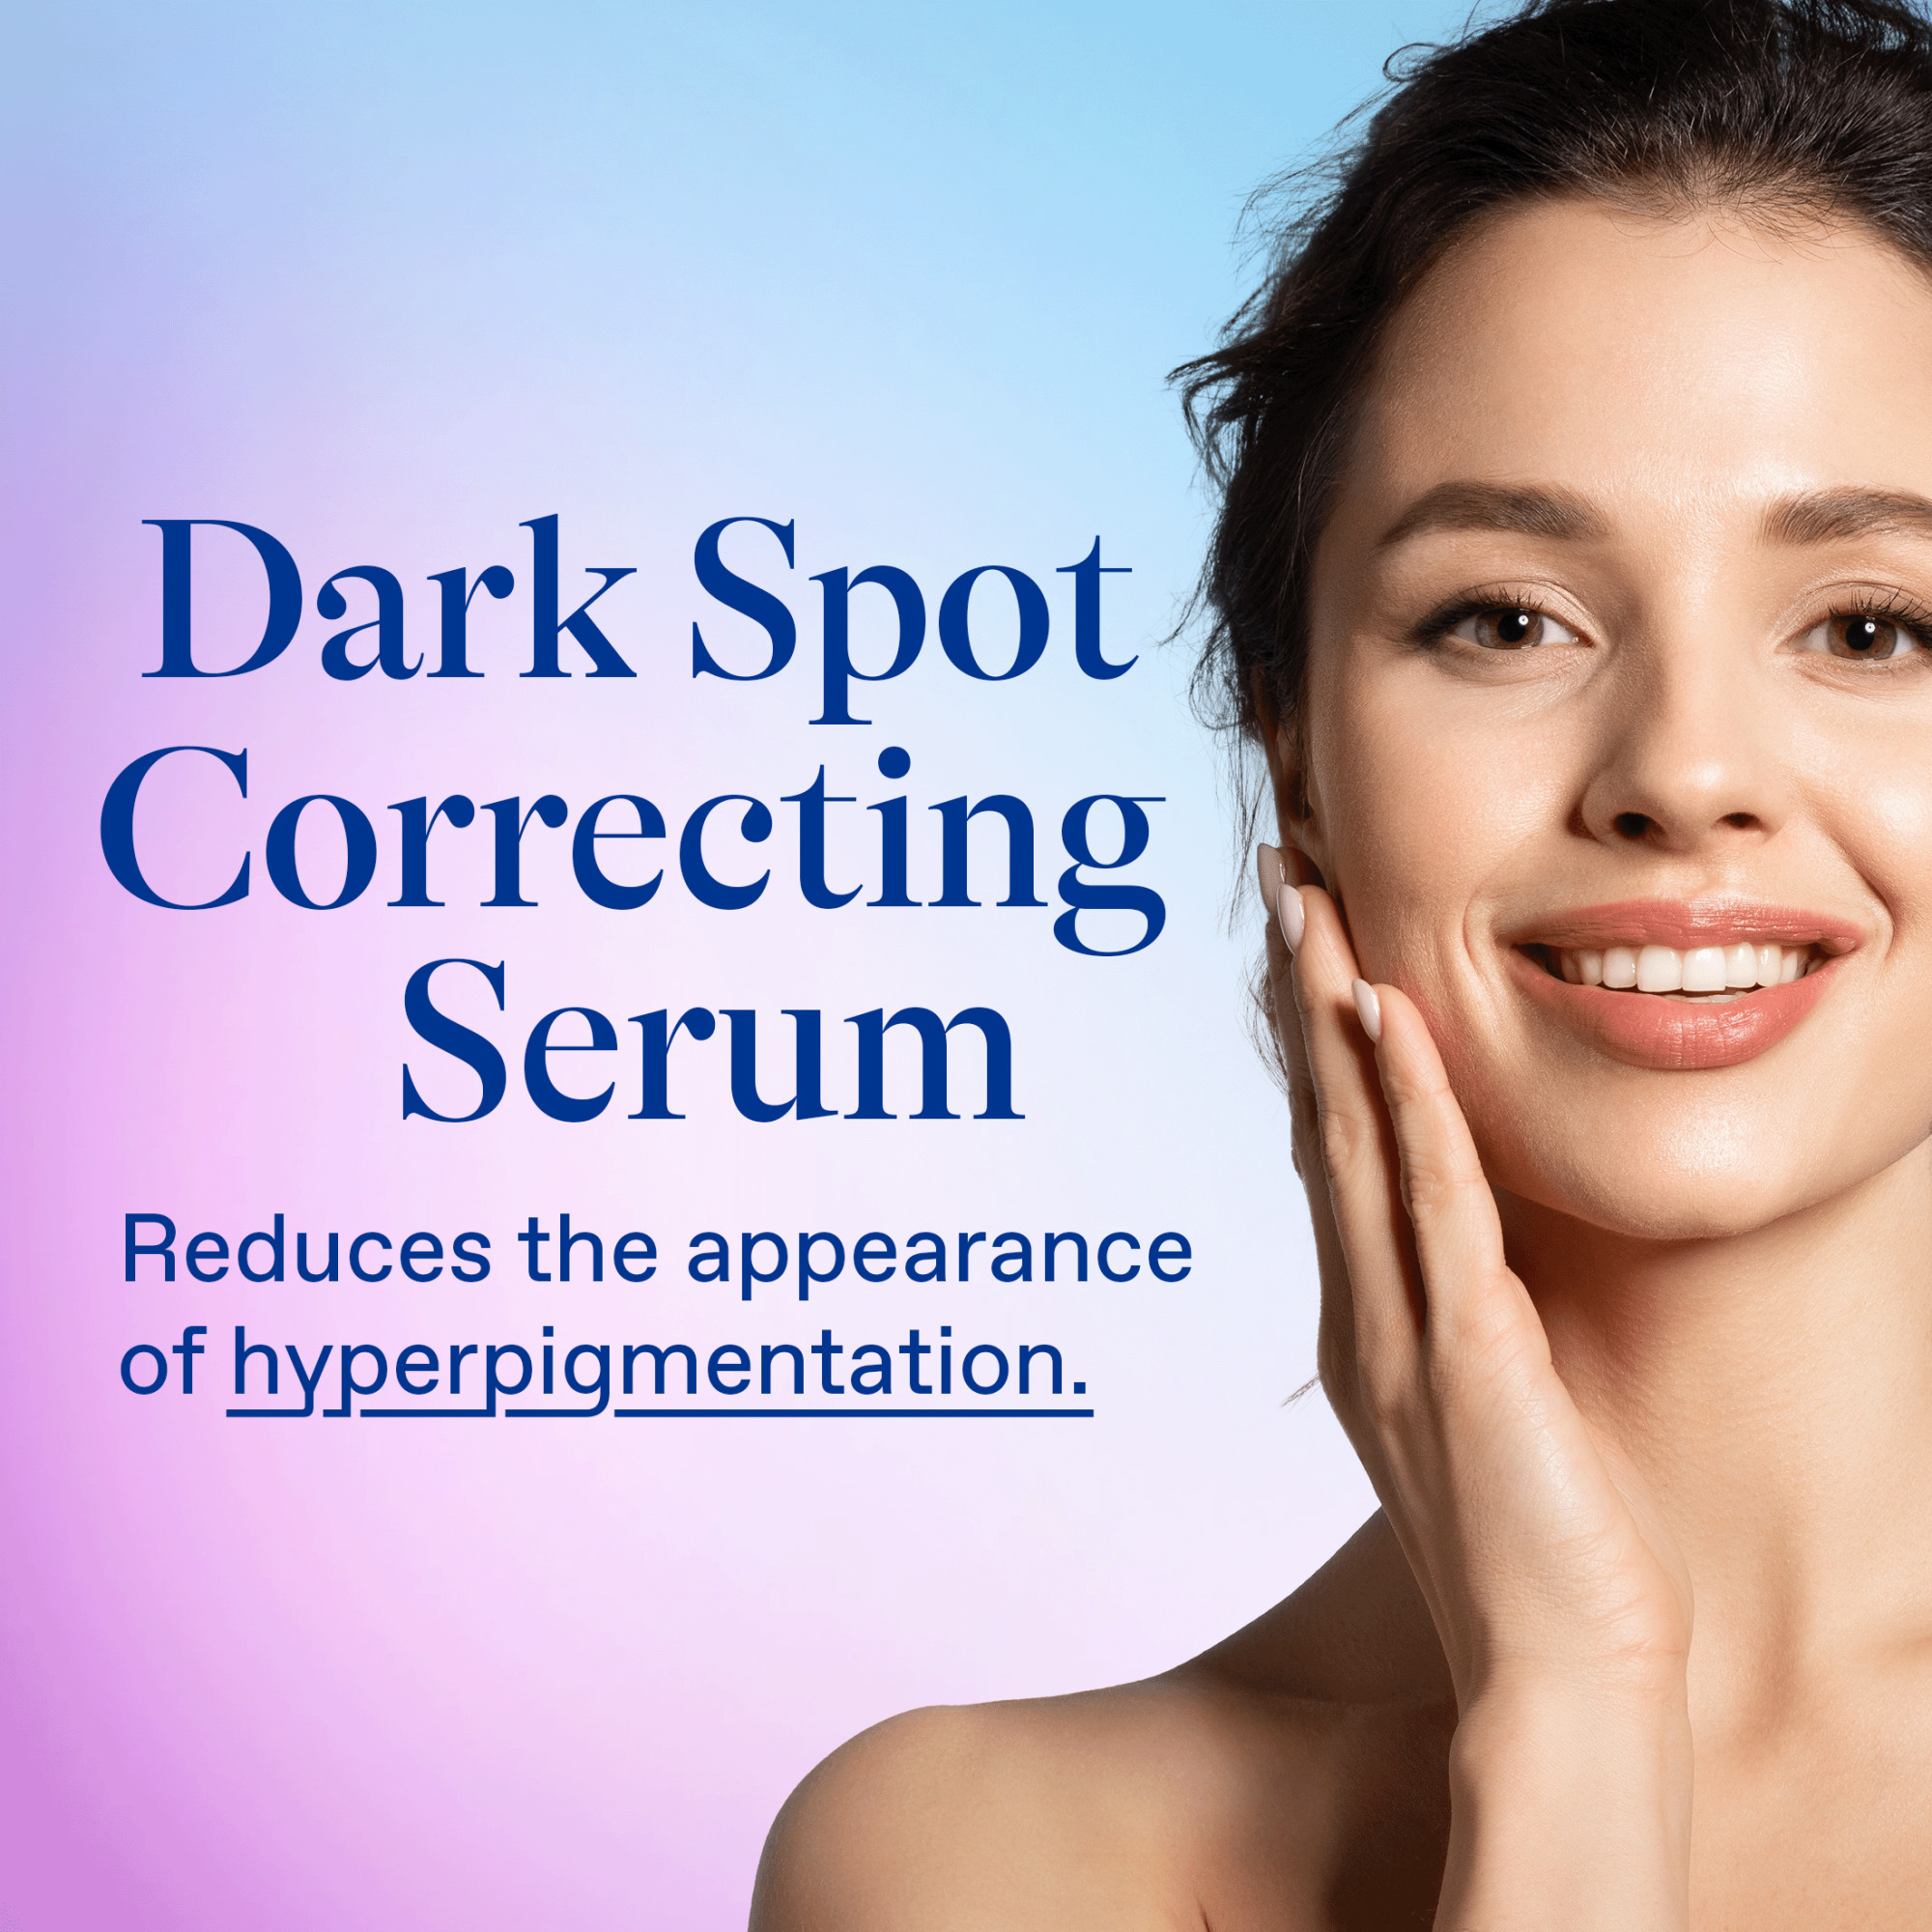 Differin Dark Spot Correcting Serum for Dark Spots and Discoloration, 1 oz - image 3 of 12